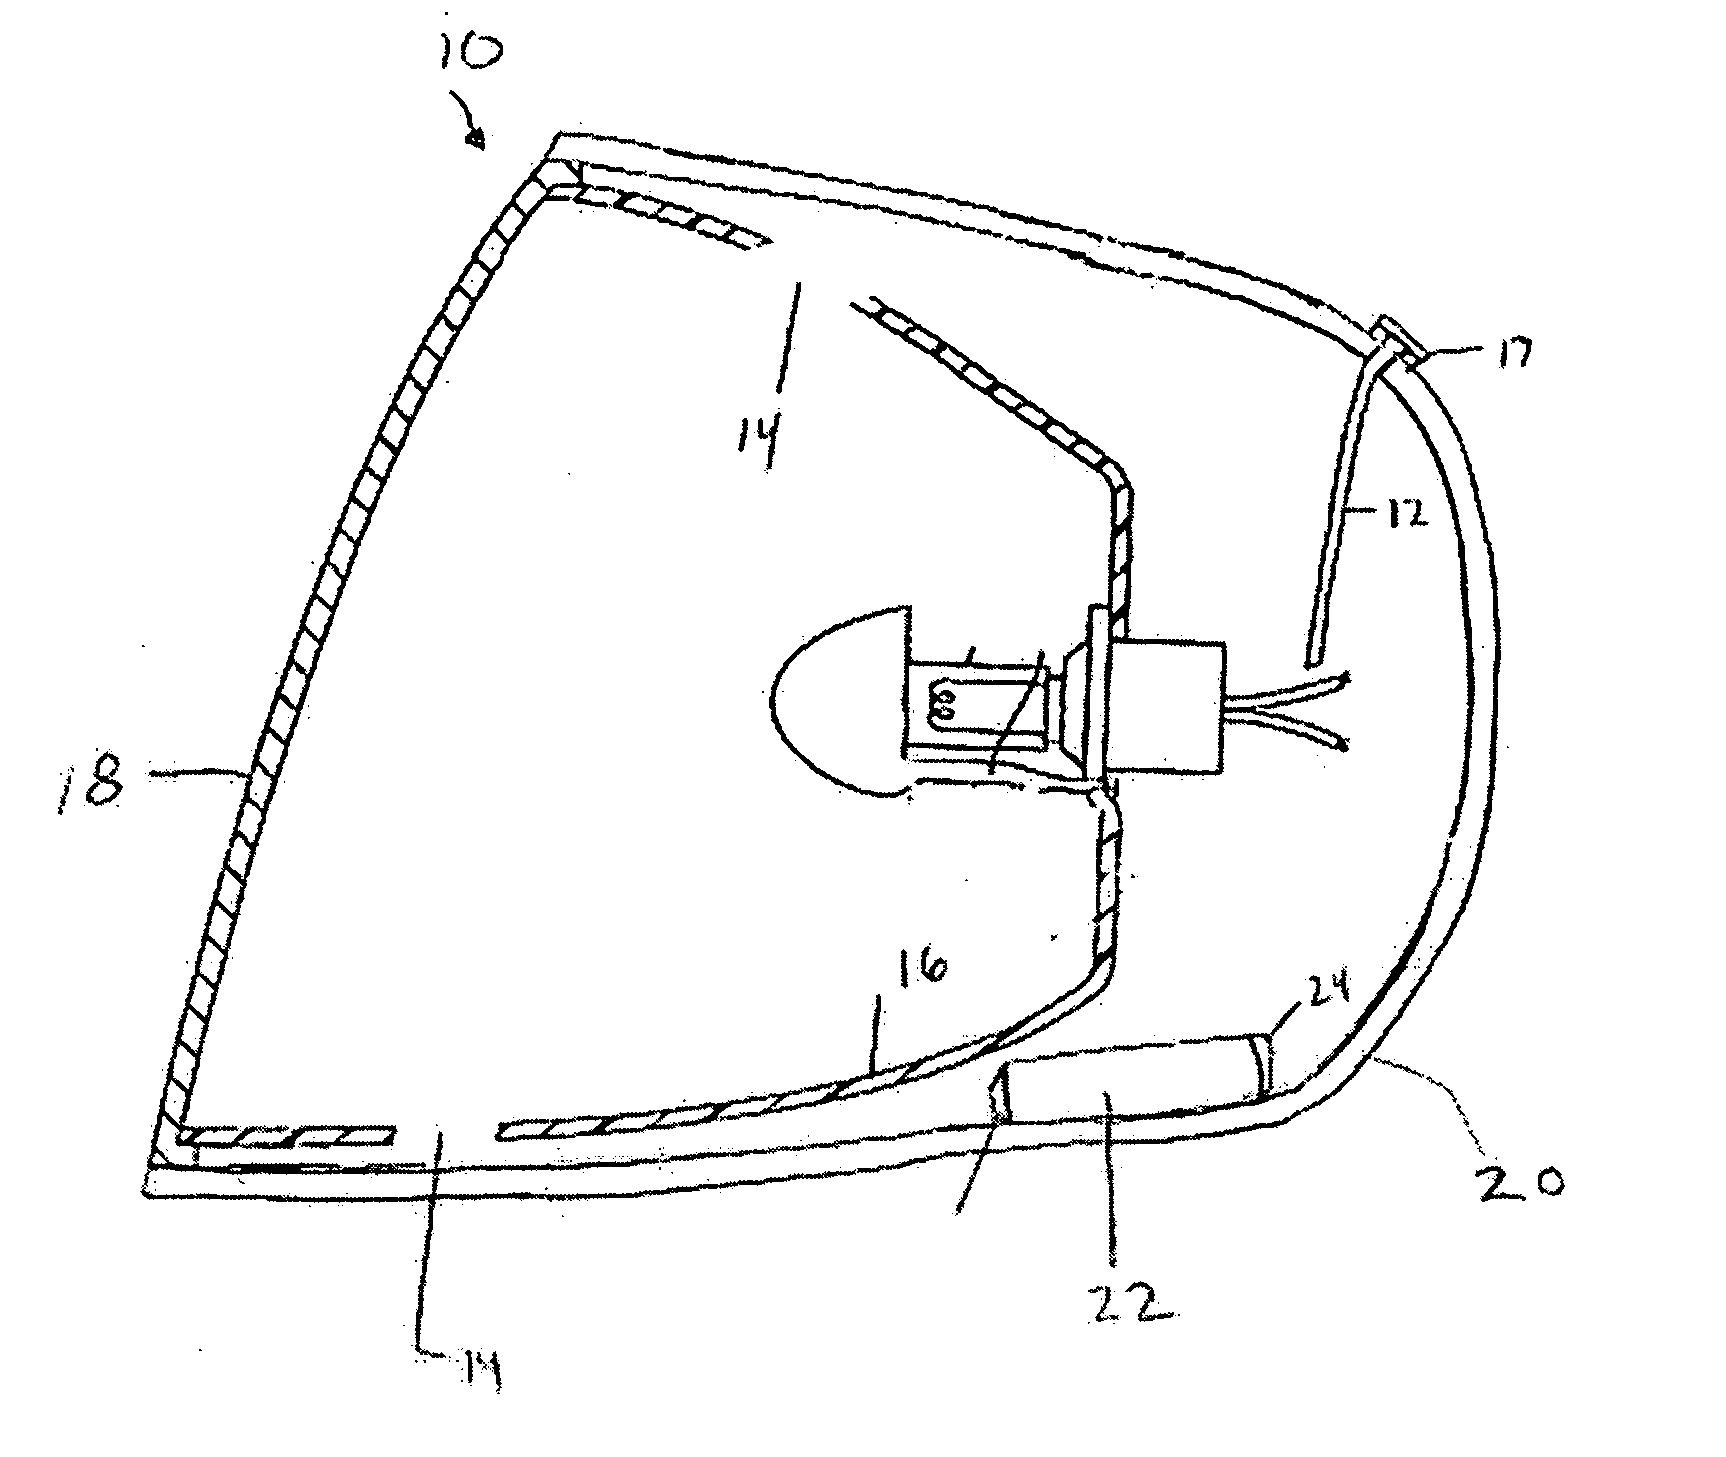 Venting system for minimizing condensation in a lighting assembly